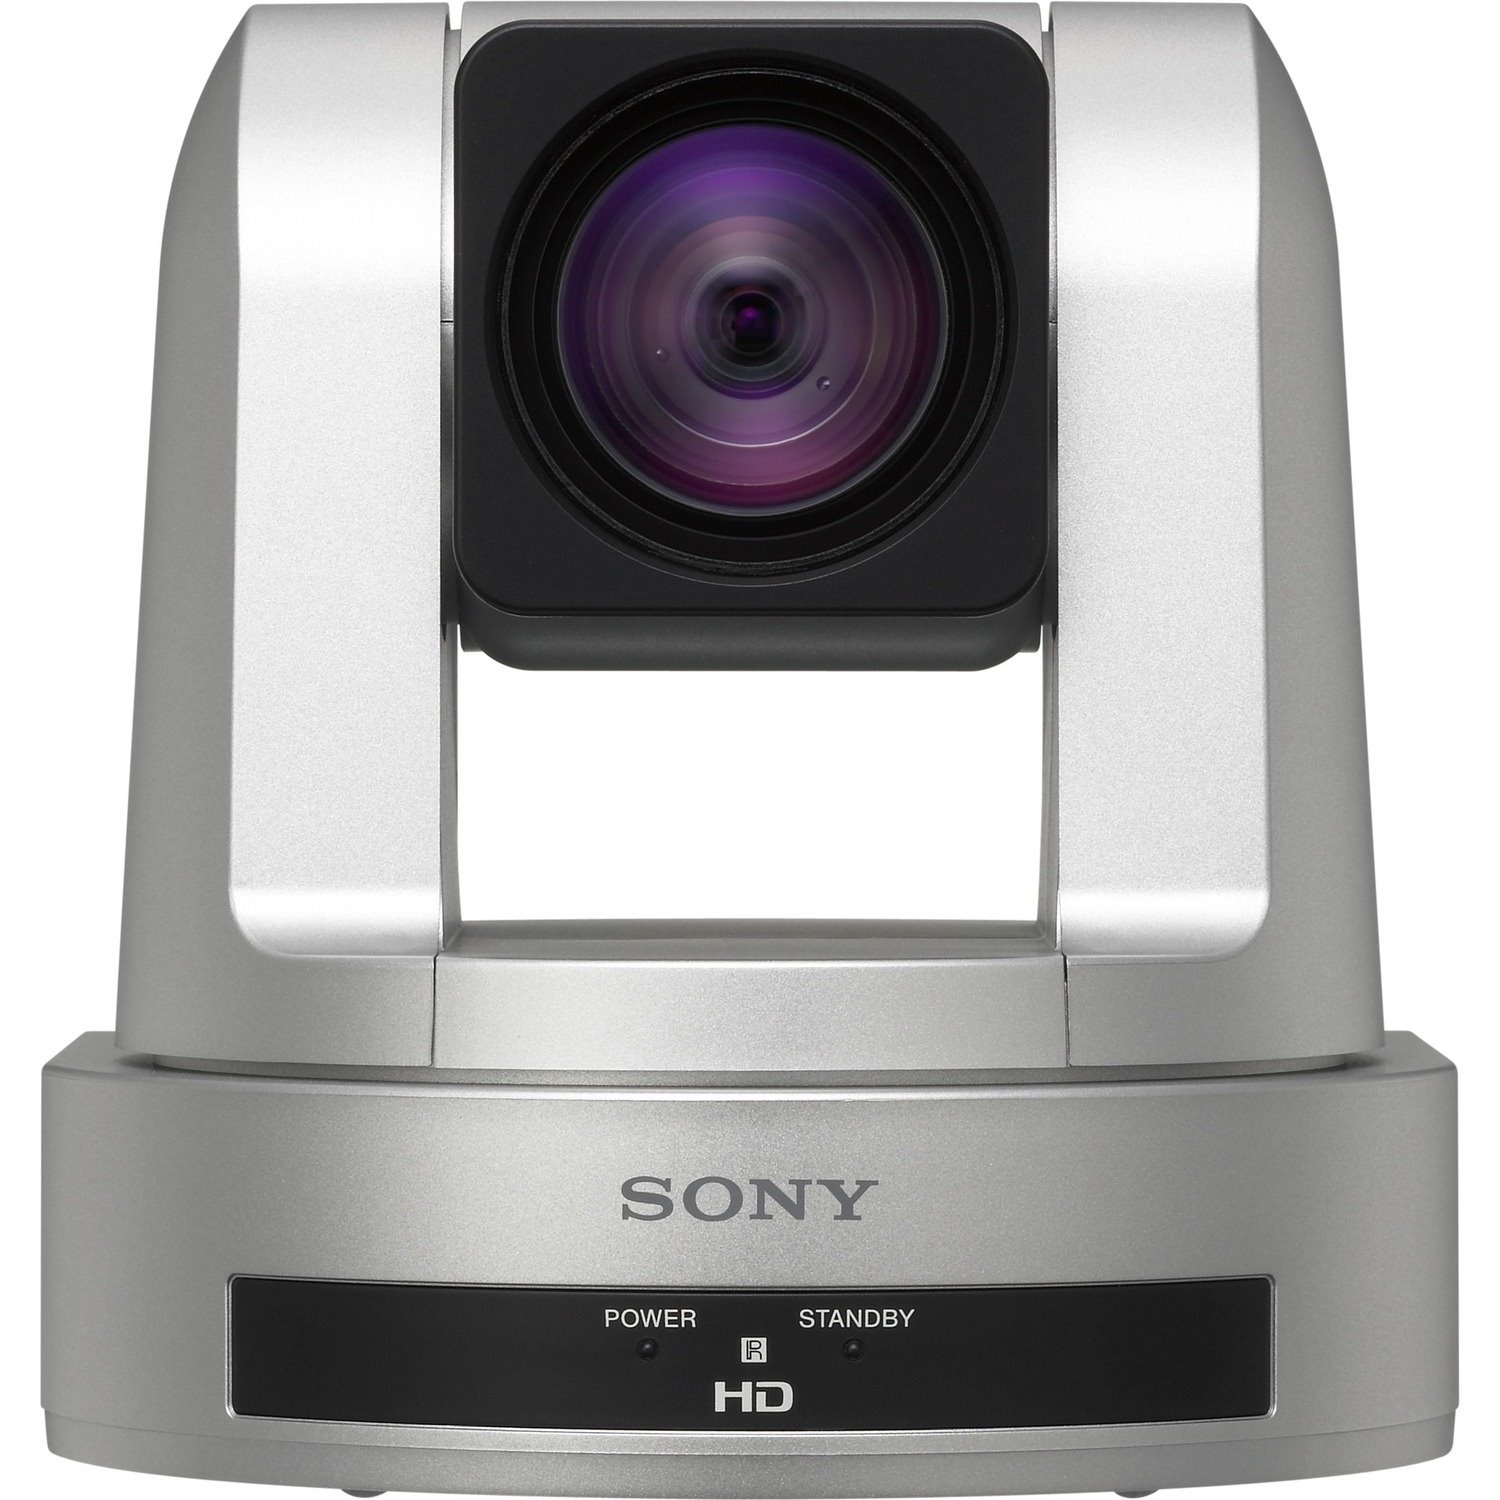 Sony SRG-120DH 2.1 Megapixel Network Camera - Colour